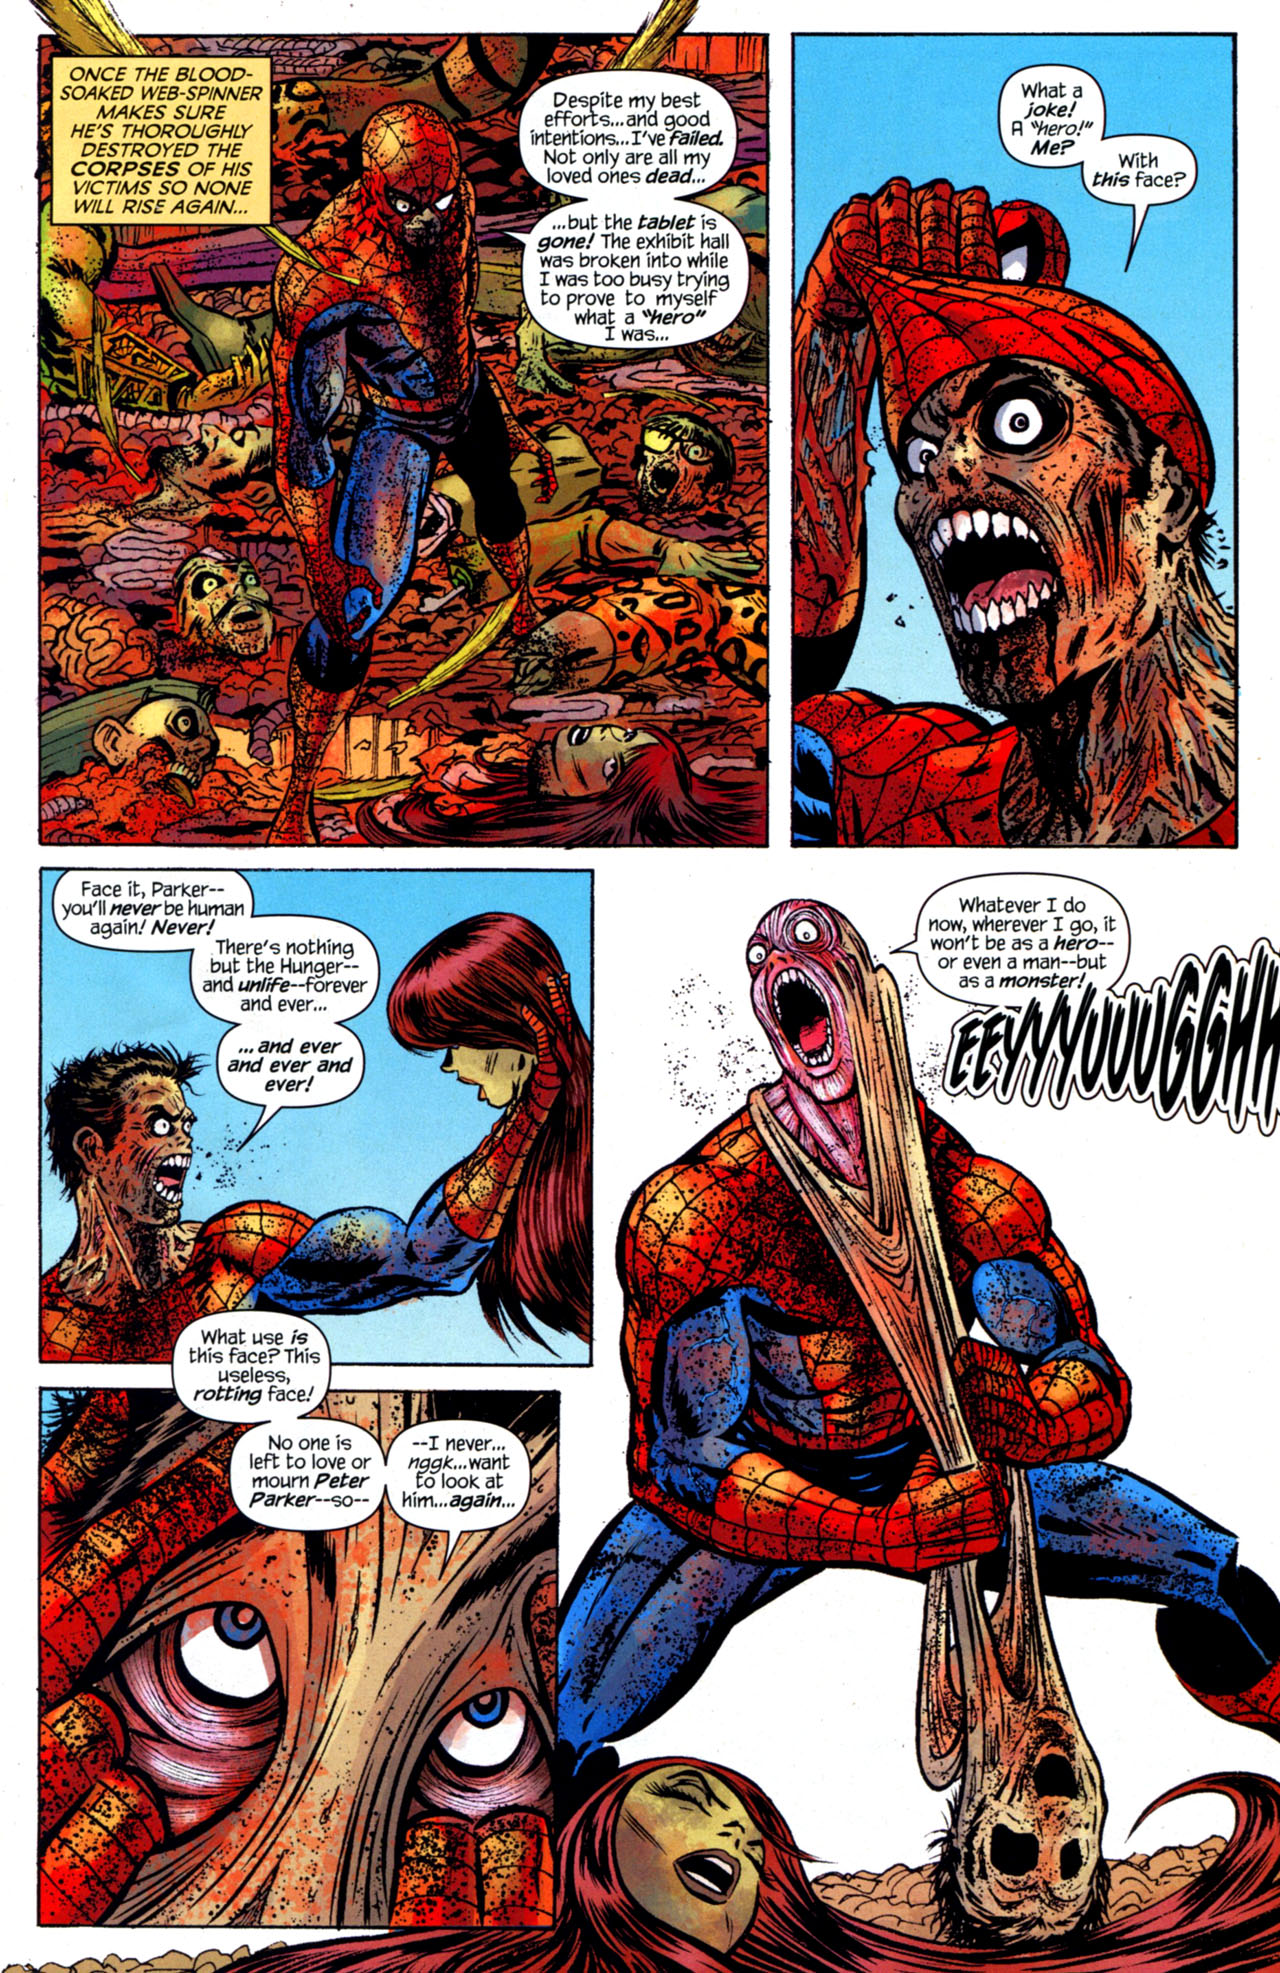 Marvel Zombies - The Return 01 of 05